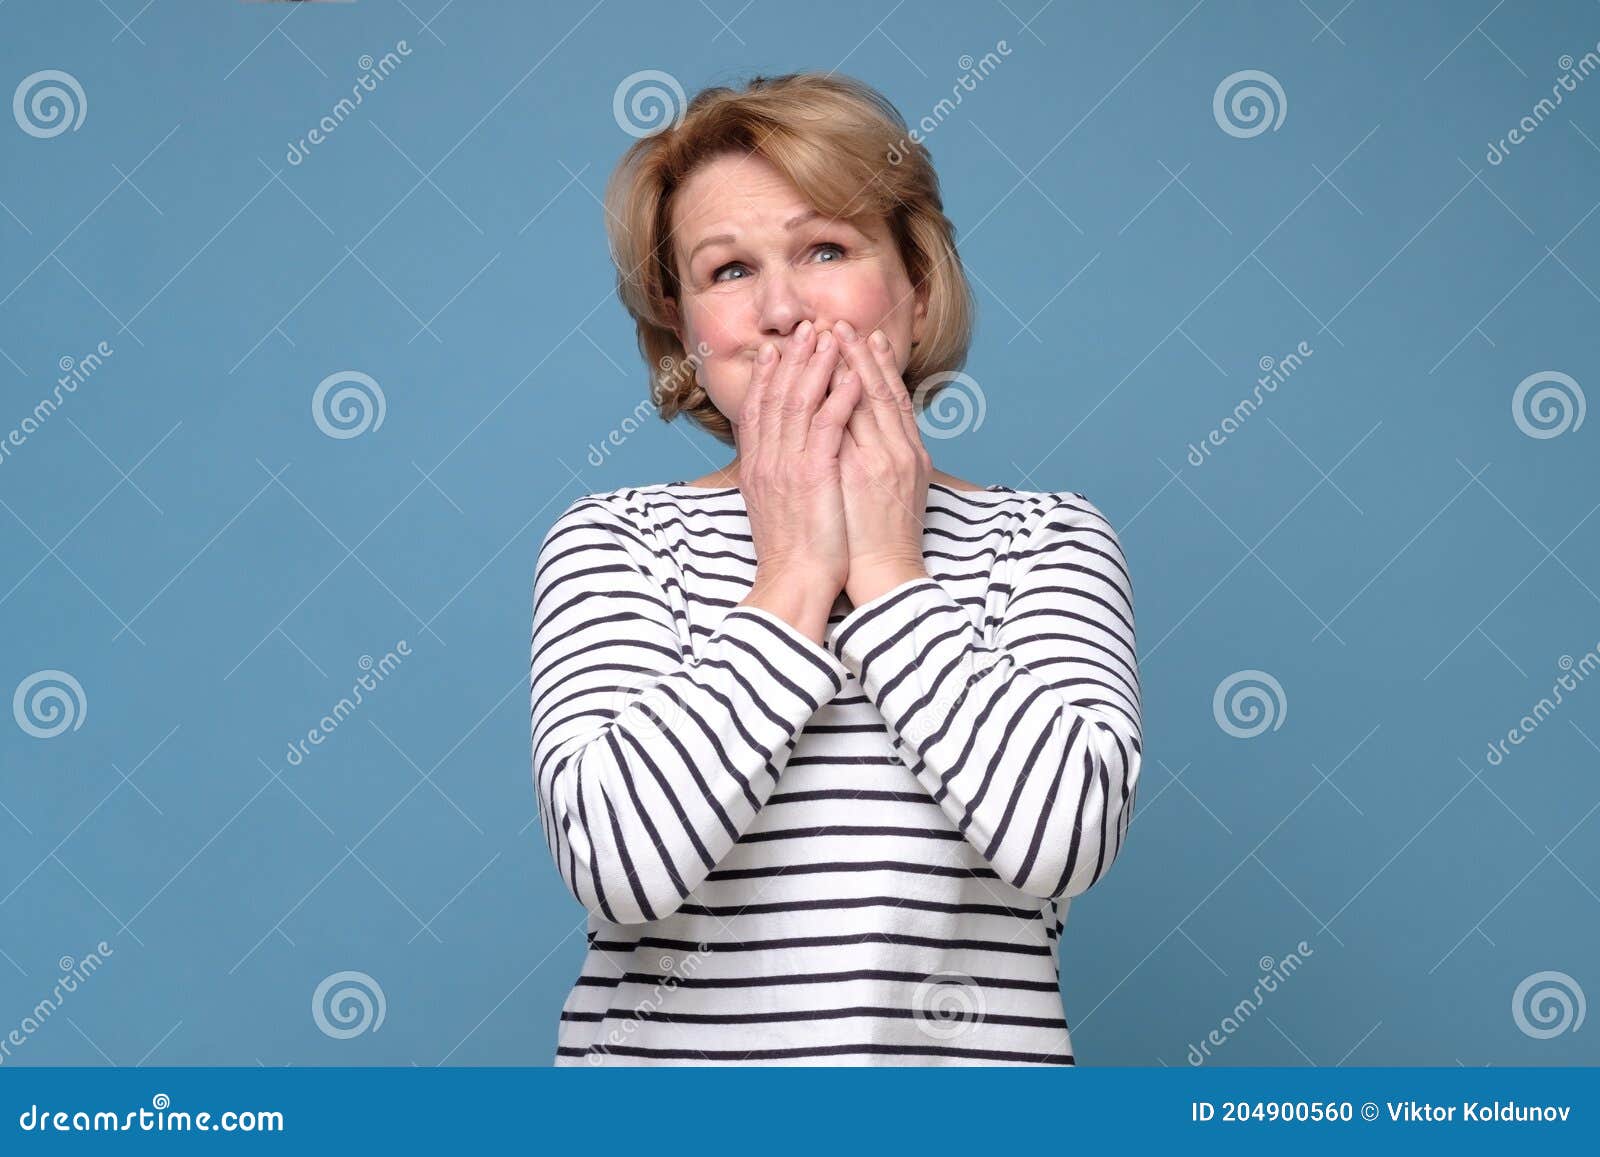 senior woman giggle covering mouth with hands. gossip concept.